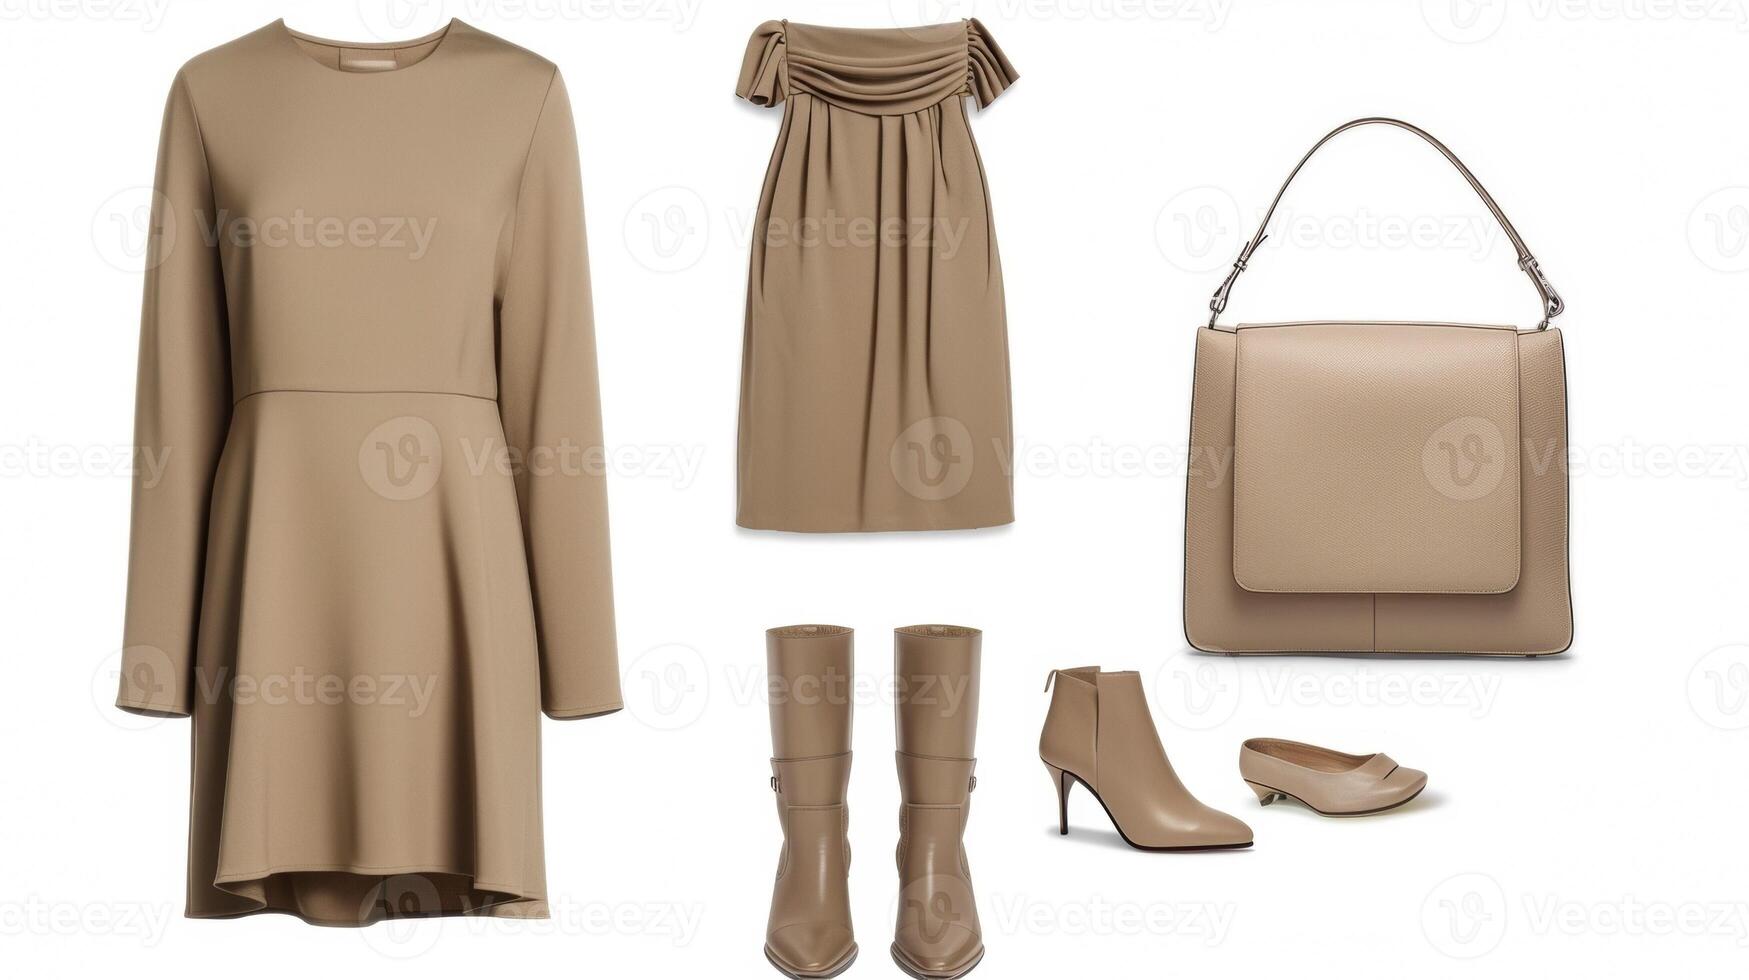 A simple yet chic shift dress in a neutral color creates a clean and minimalist look. Pair it with sleek ankle boots and a structured shoulder bag for a touch of luxury photo